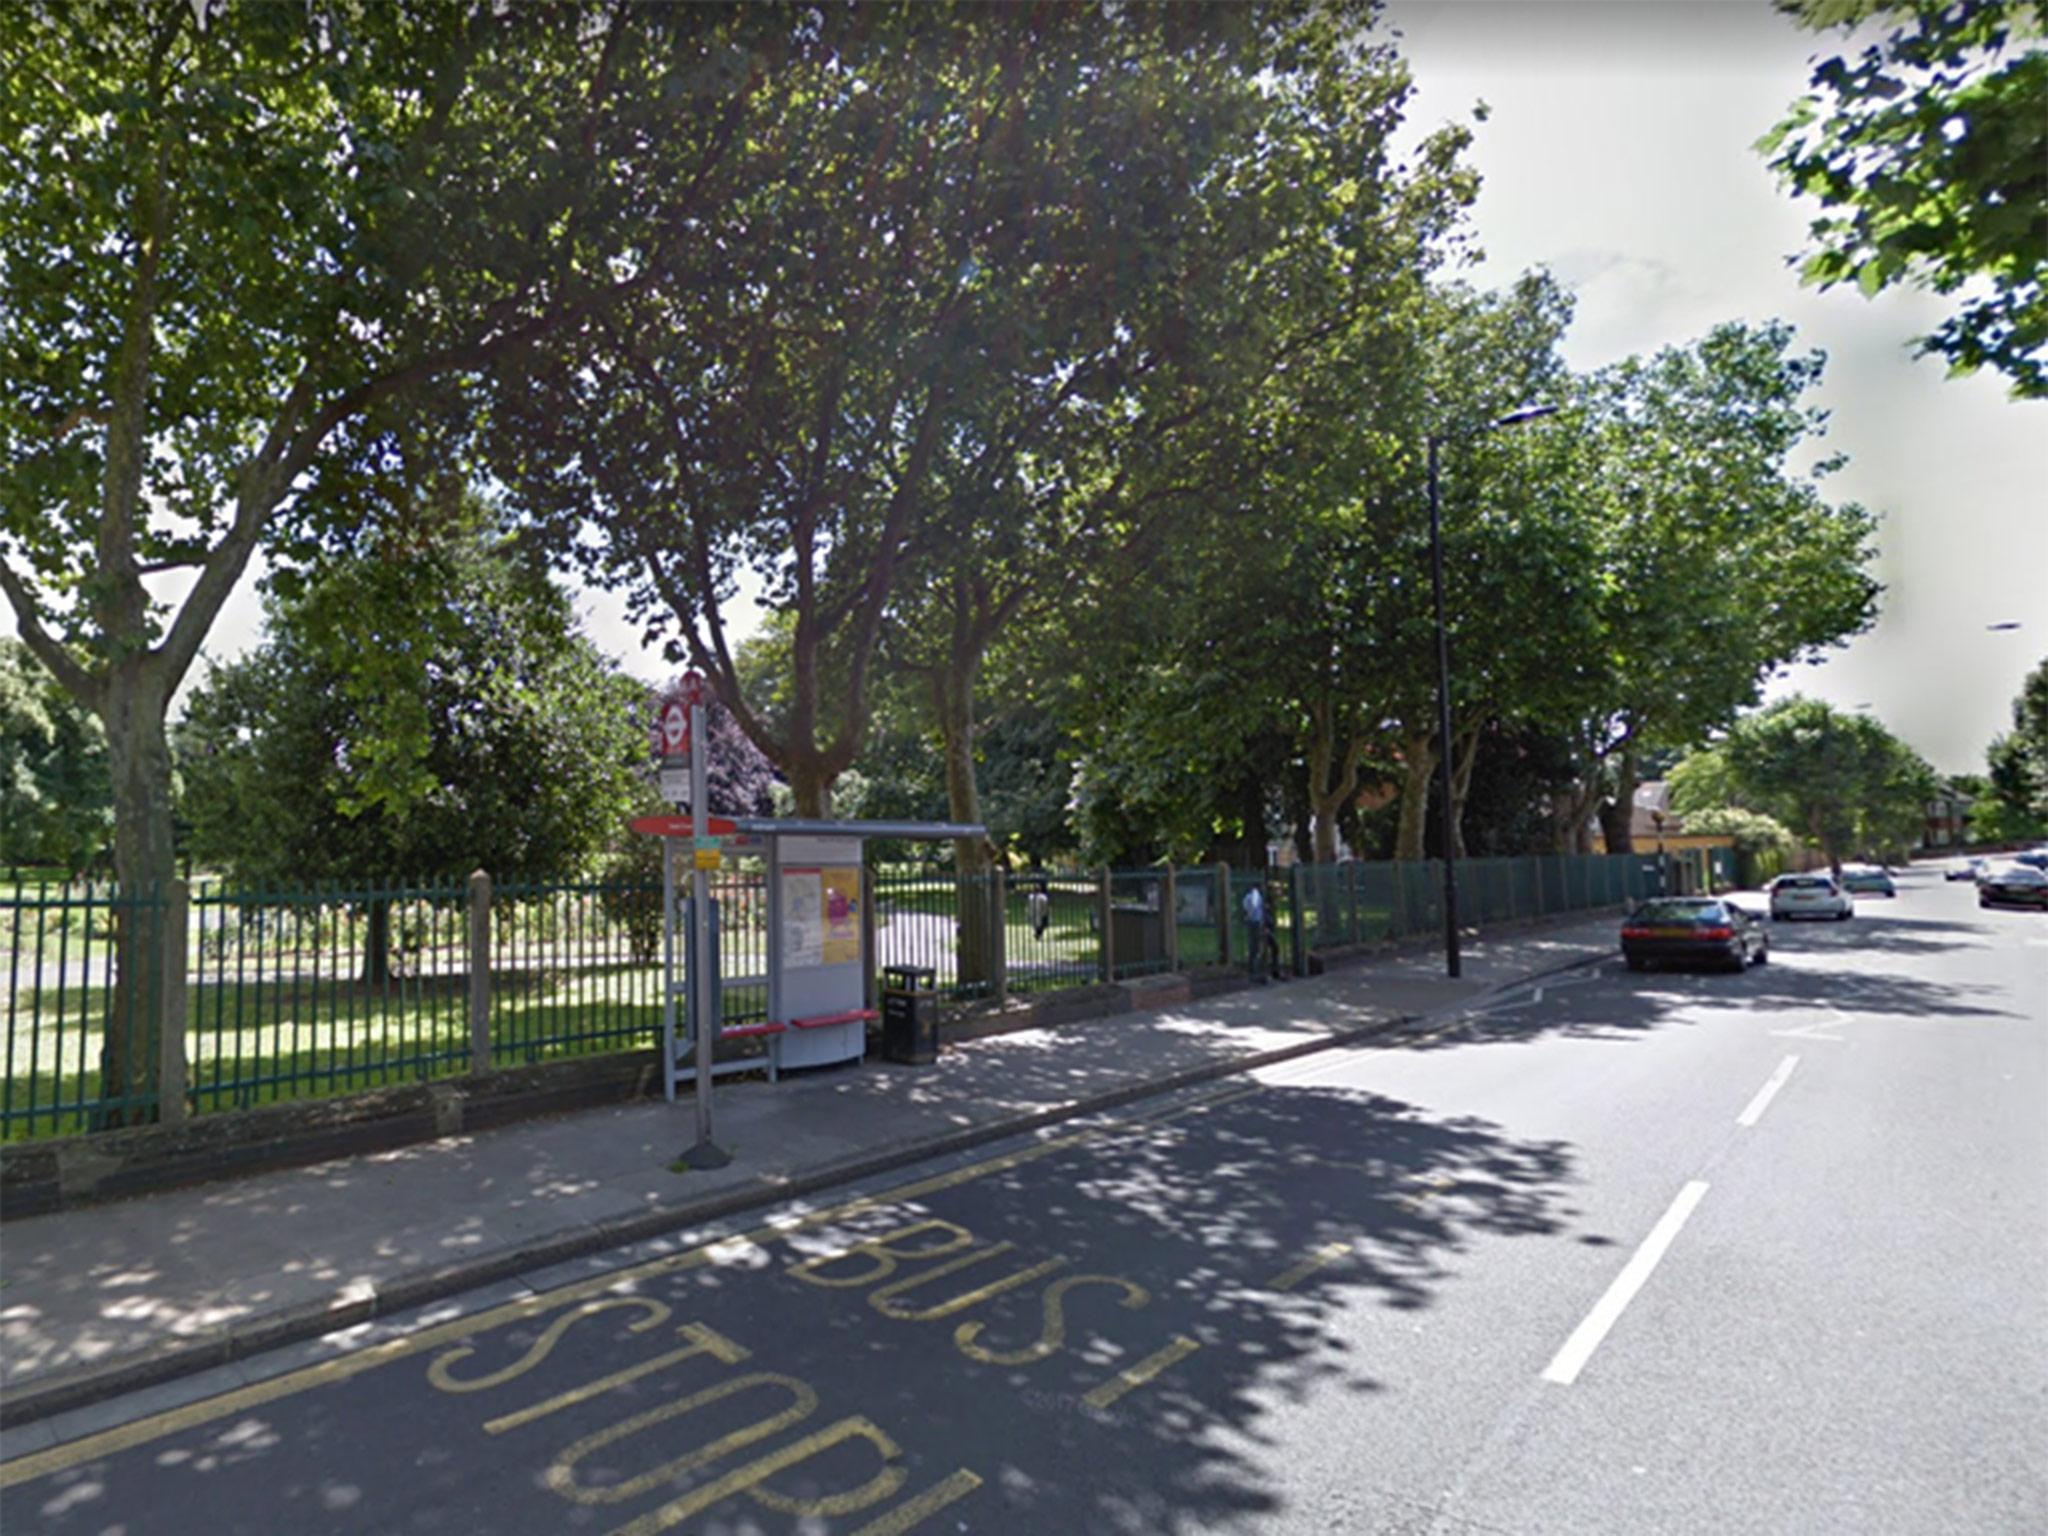 The baby is reported to have been left, wrapped in a blanket, in Plaistow Park